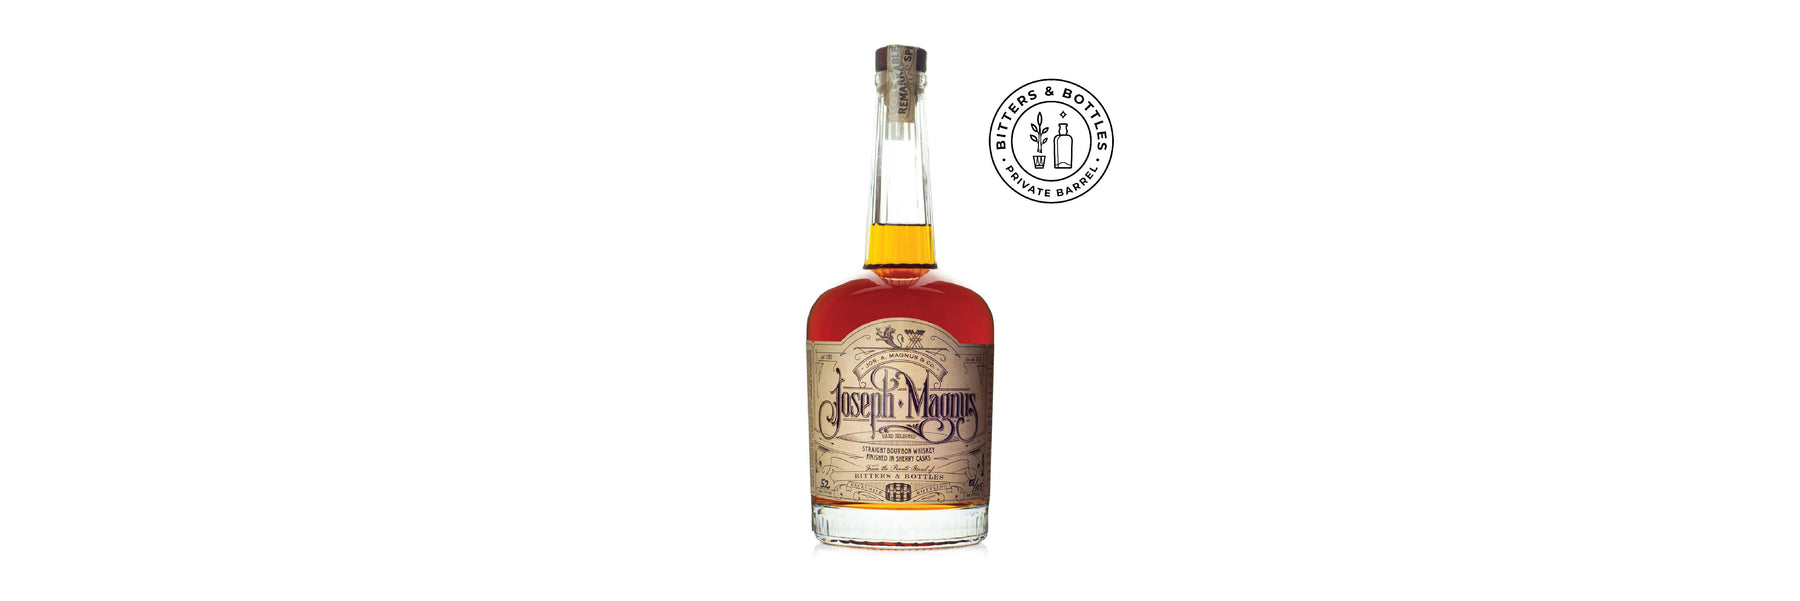 New 13 Year Bourbon, With A Special Finish: Joseph Magnus 13.5 Year